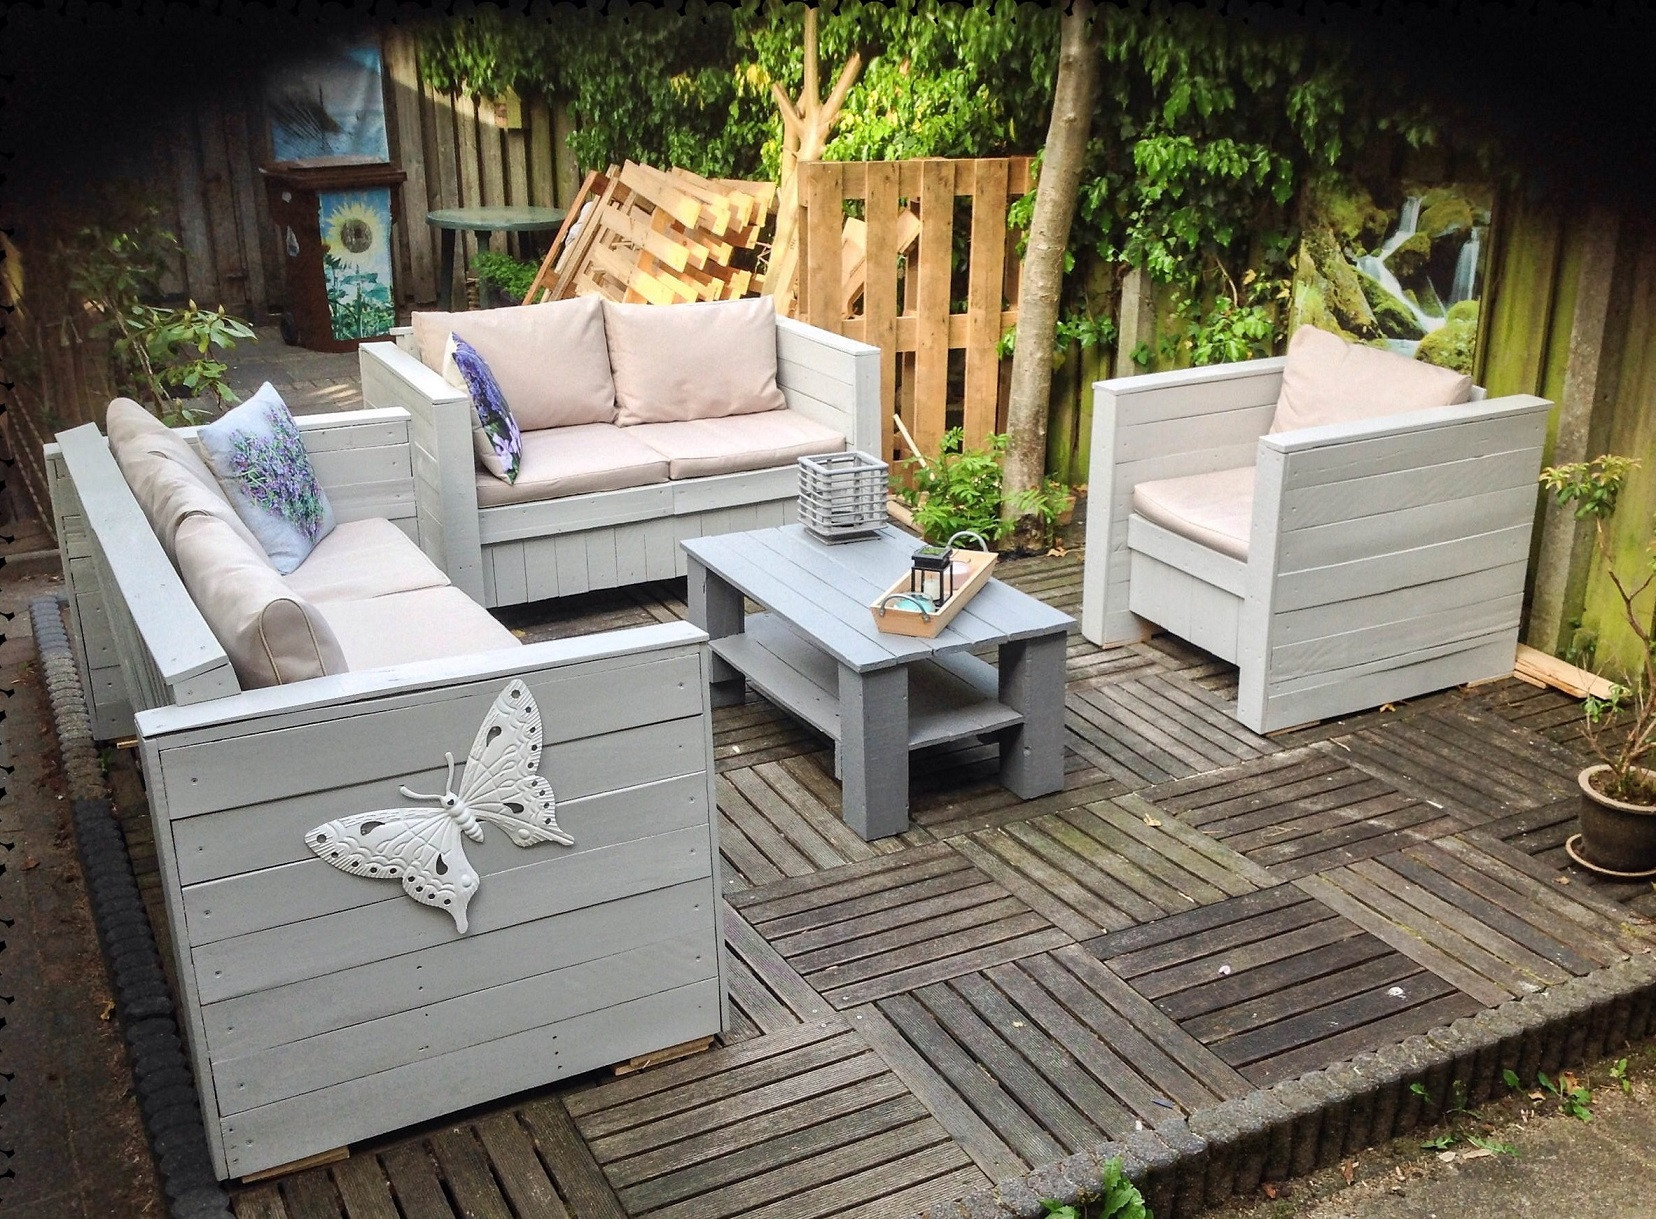 Pallet Backyard Furniture
 Shipping Pallets Outdoor Furniture – Ideas with Pallets